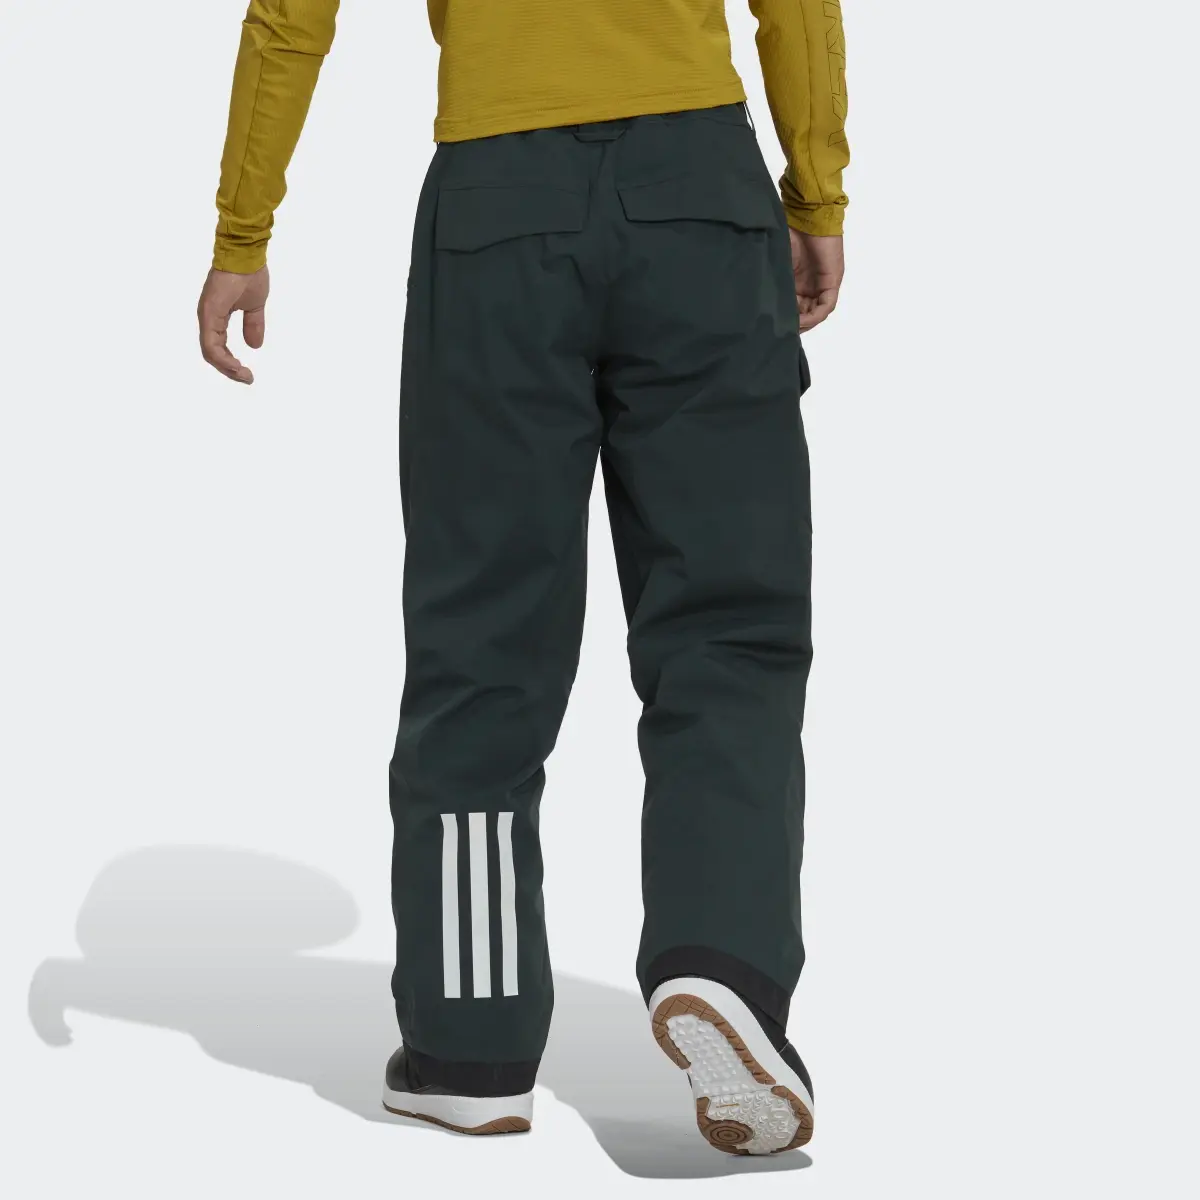 Adidas TERREX RESORT TWO LAYER INSULATED SNOW PANTS. 3